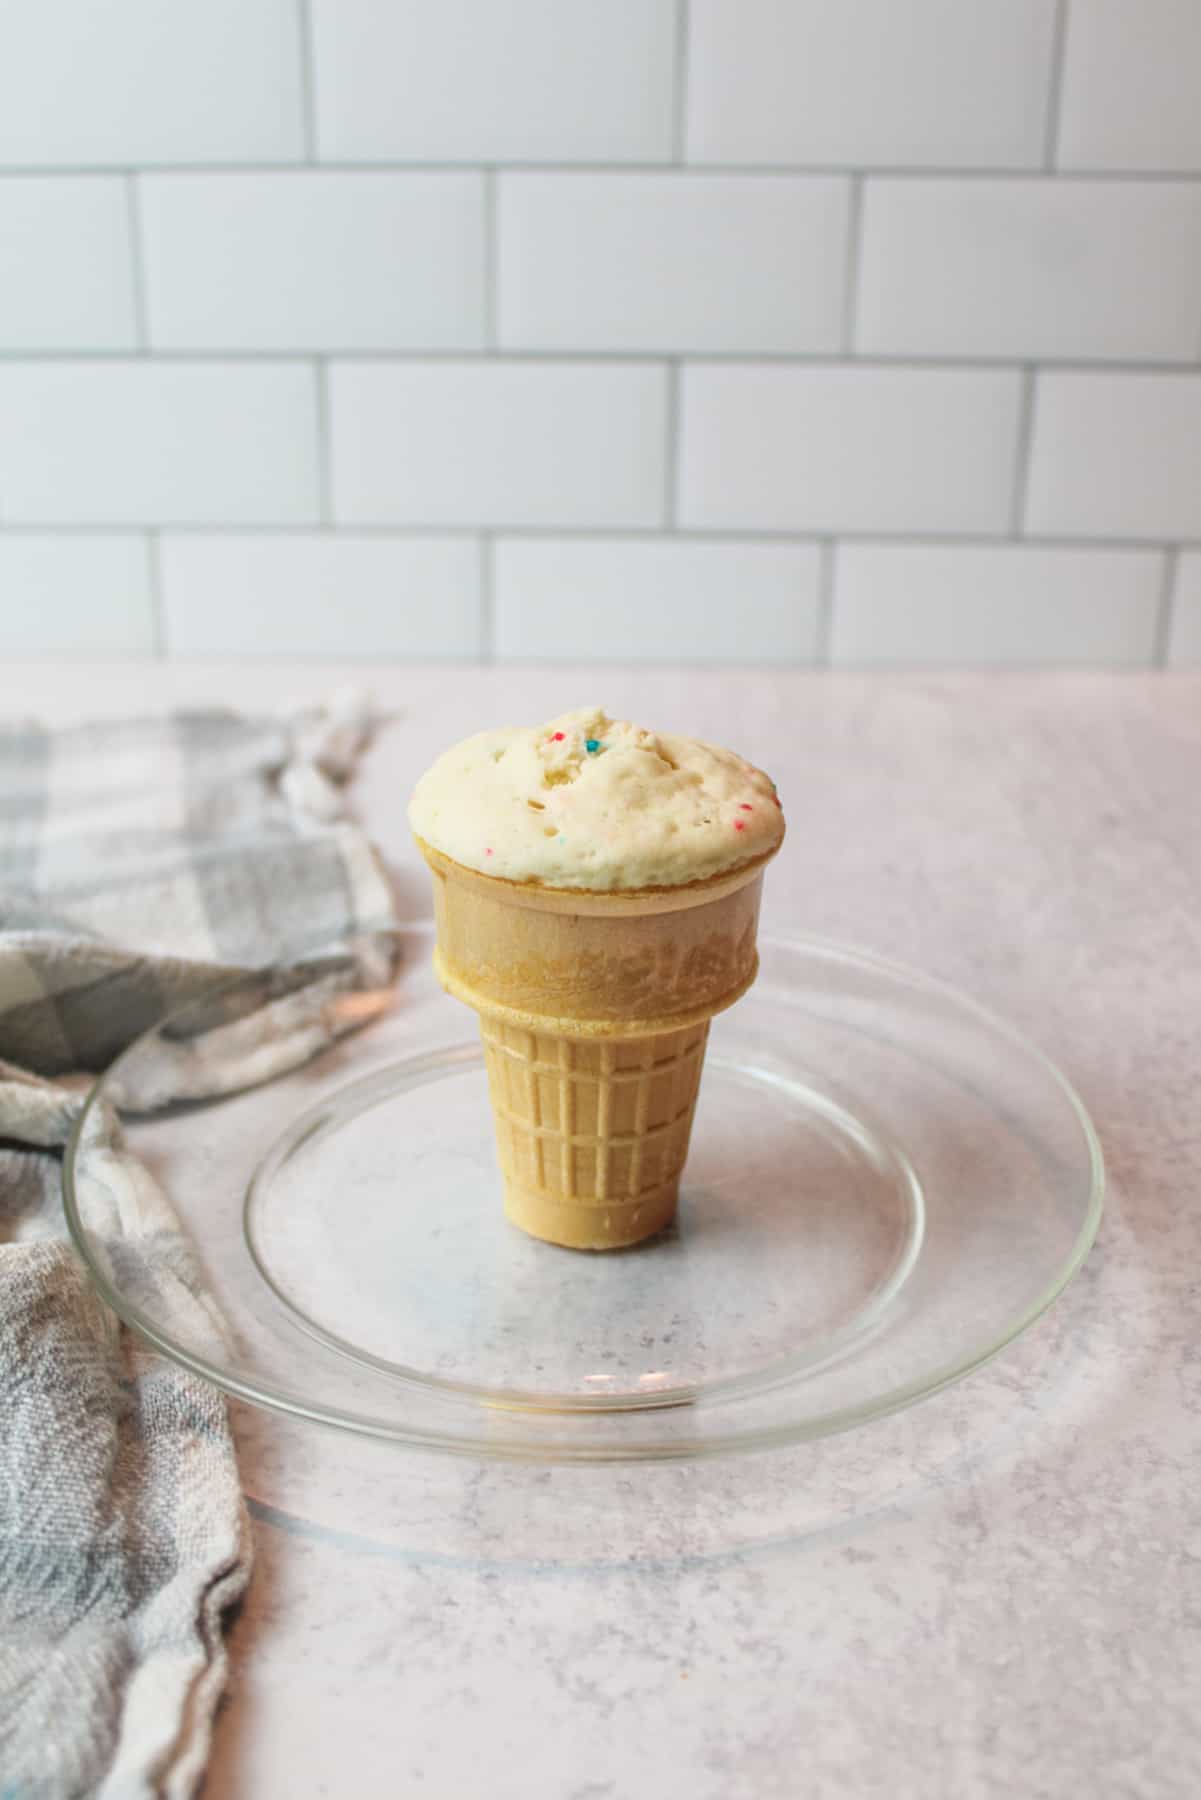 cooked microwave ice cream cone cupcake on a plate